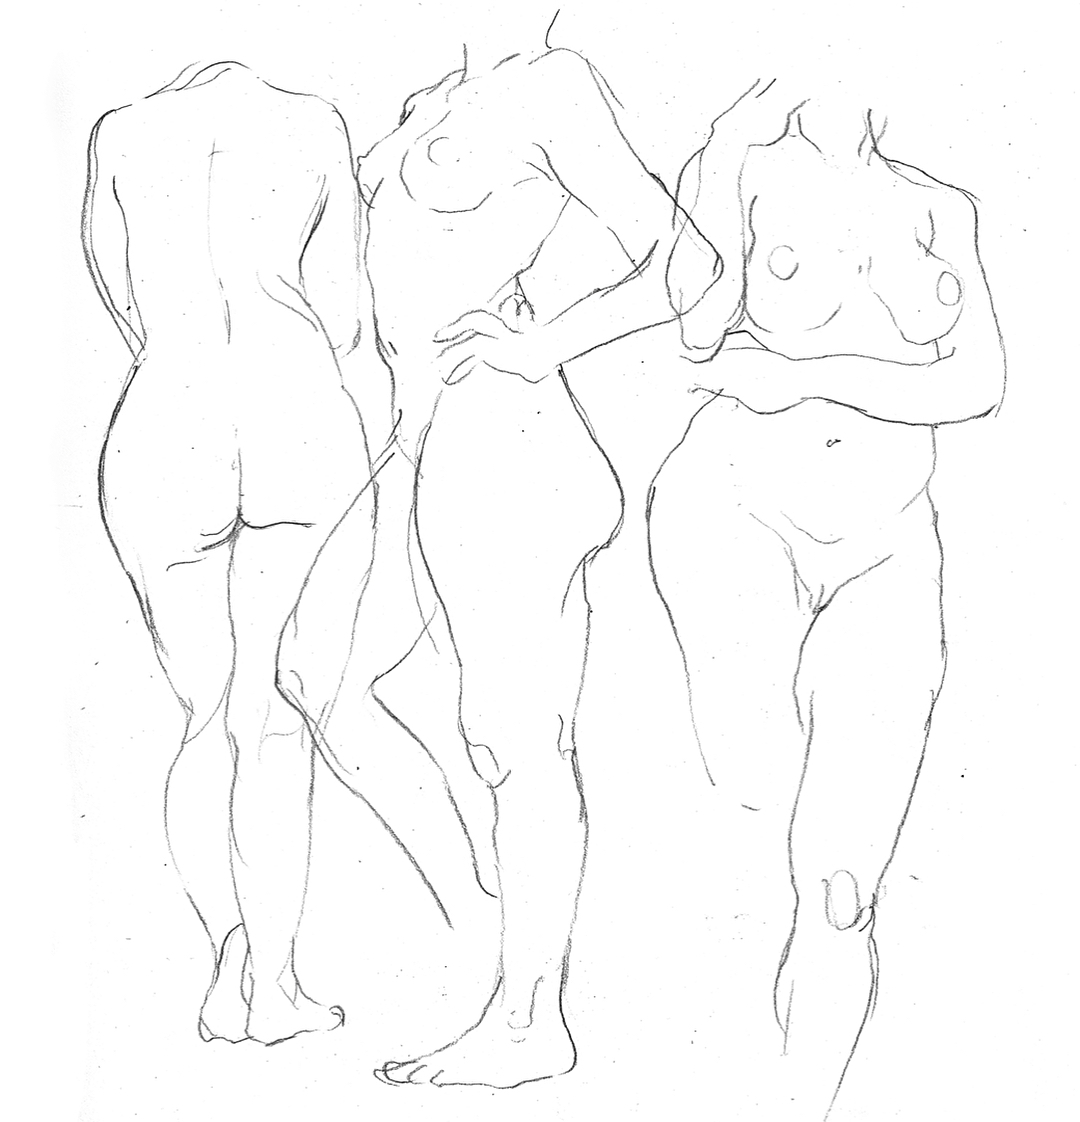 also some super old figure drawings. i would just take a bus to los feliz and draw there lol. 